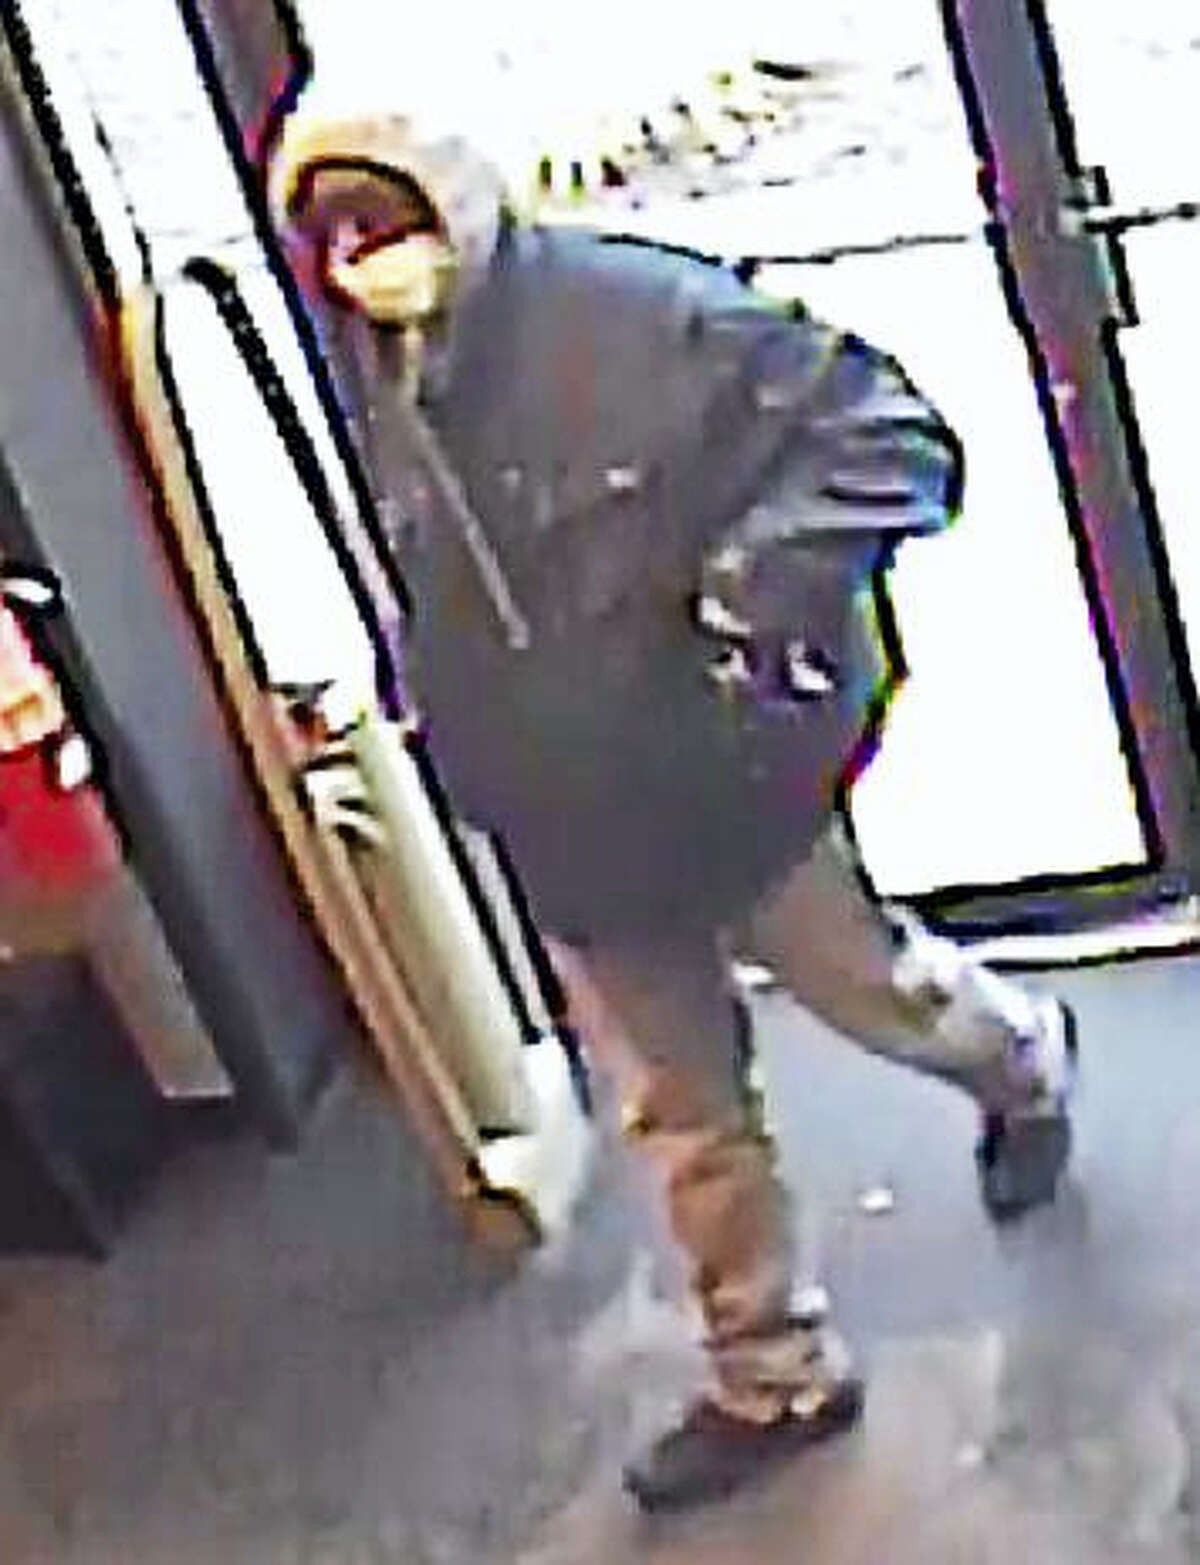 Police are looking for this man who they say robbed the EbLens on Foxon Road in East Haven on Tuesday.